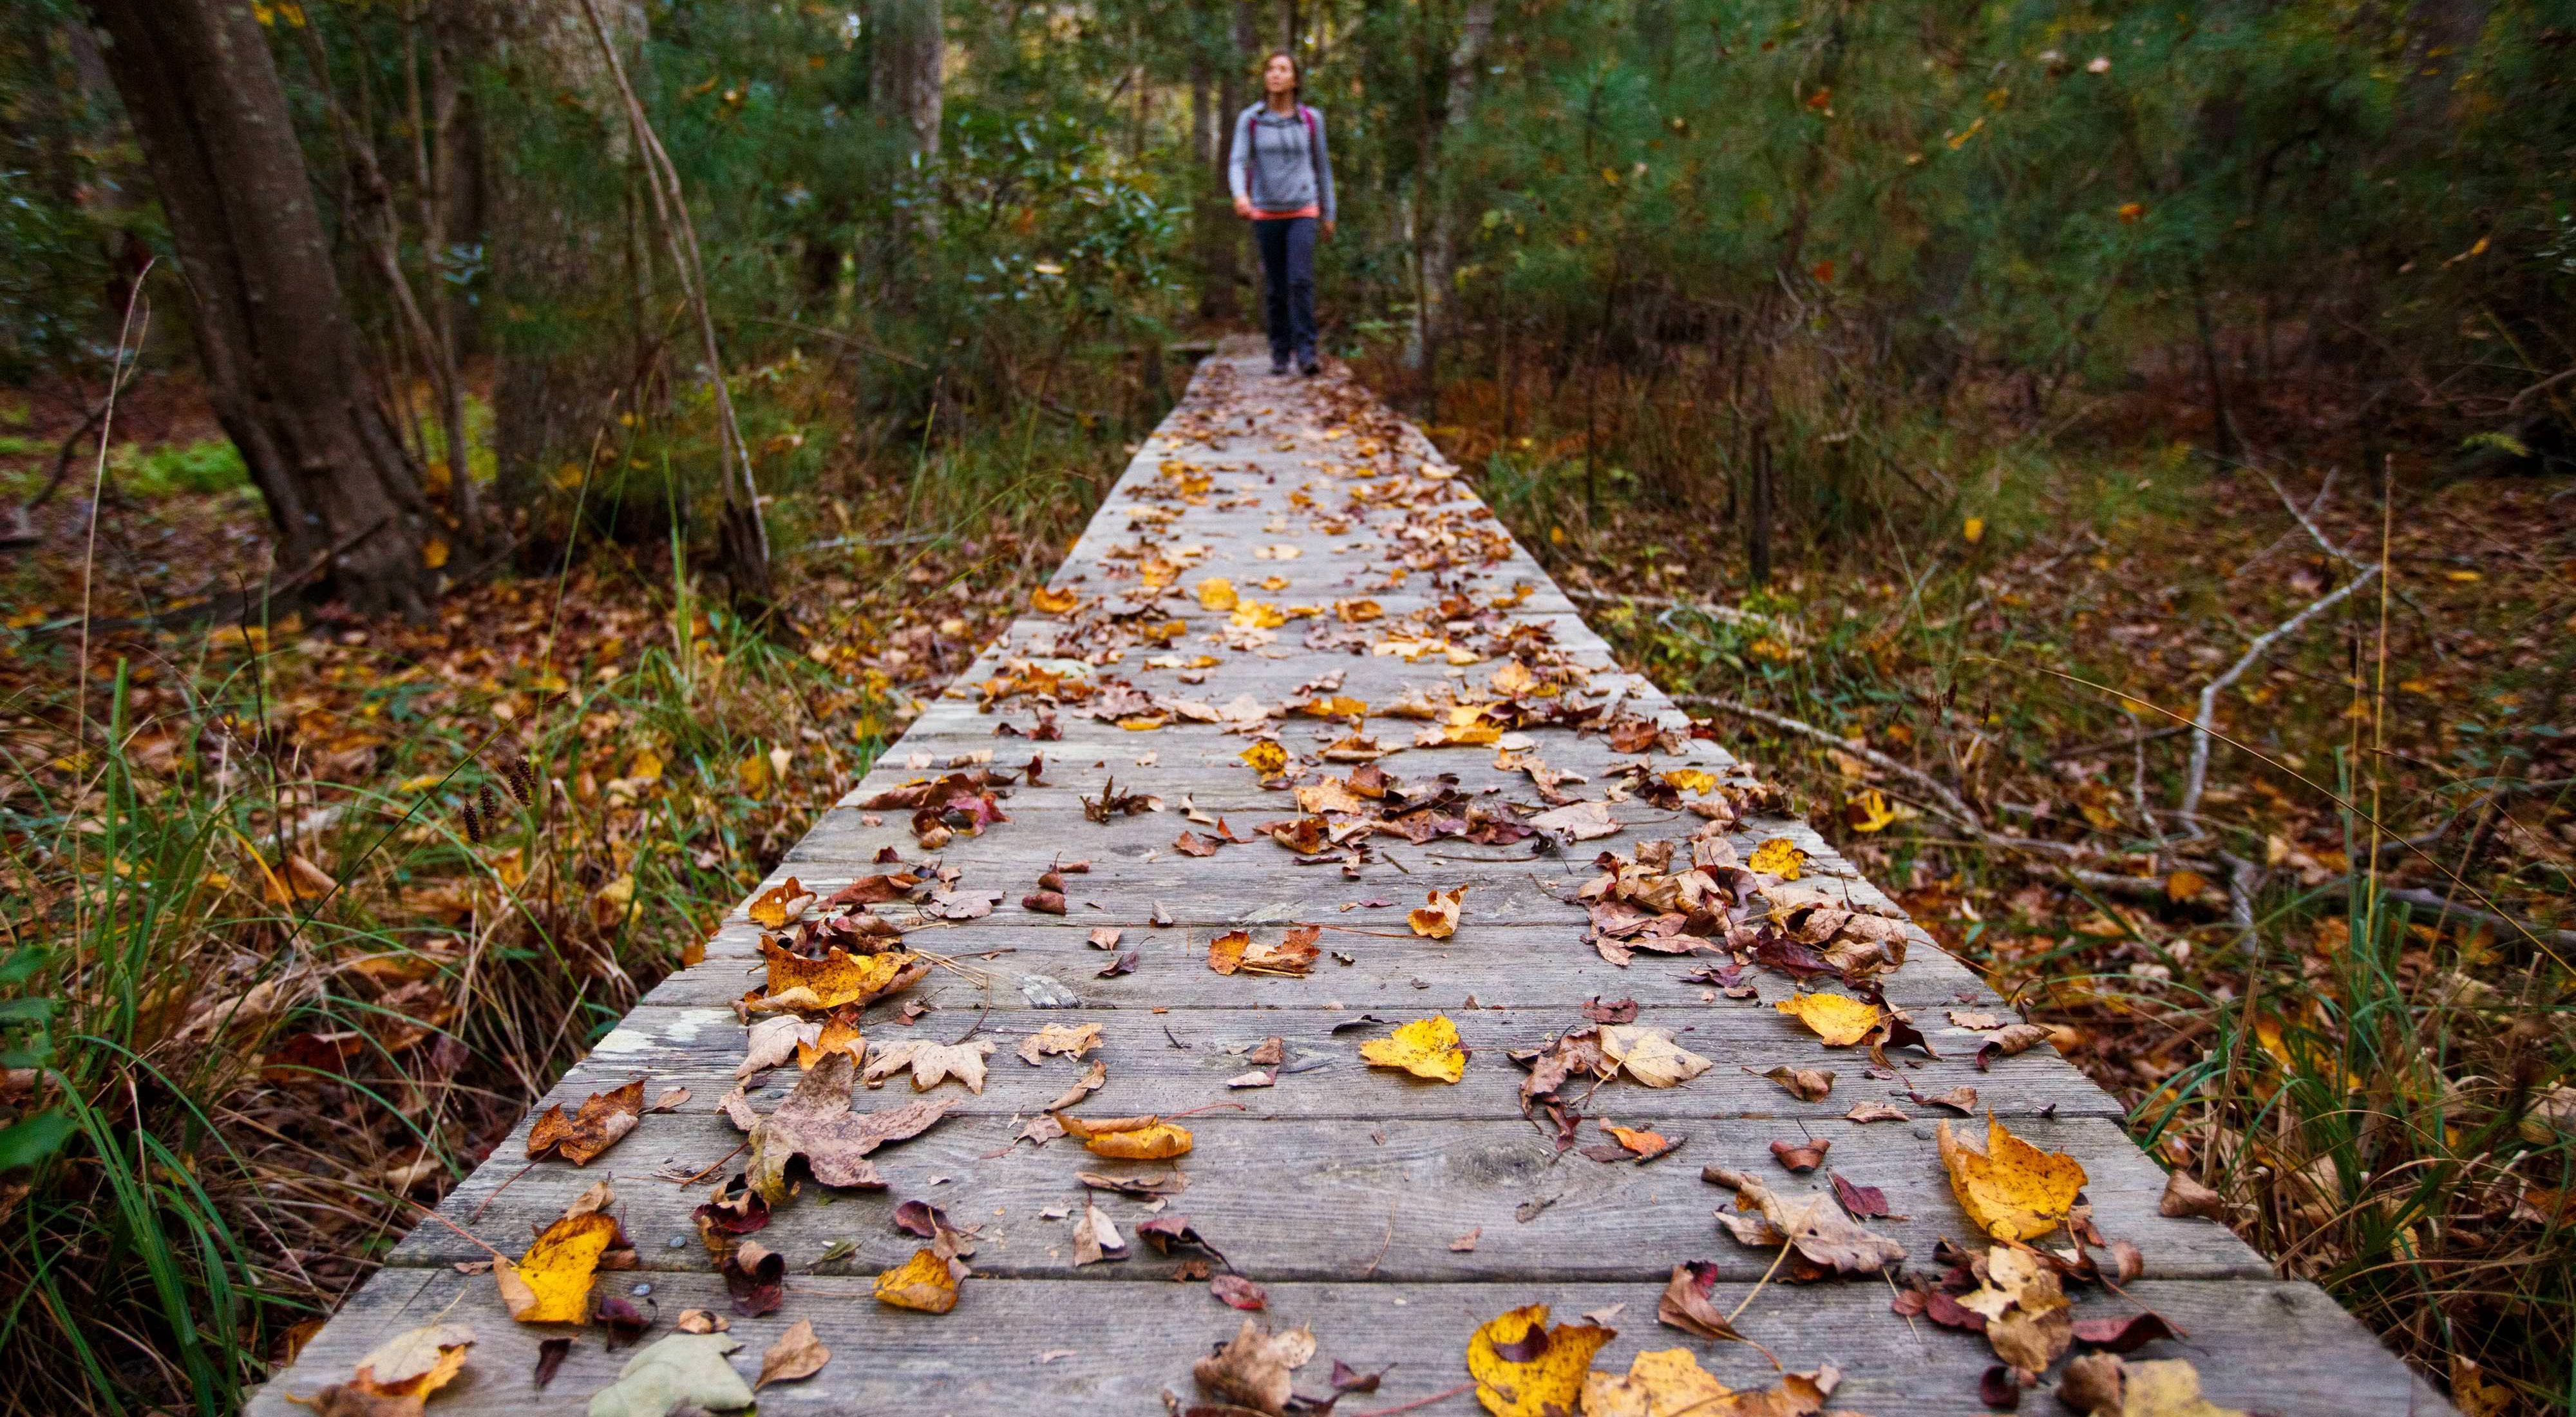 Bekah Herndon hikes amidst colorful fallen leaves on a boardwalk along the Blueberry Ridge Trail in the Nags Head Woods Preserve © Ben Herndon